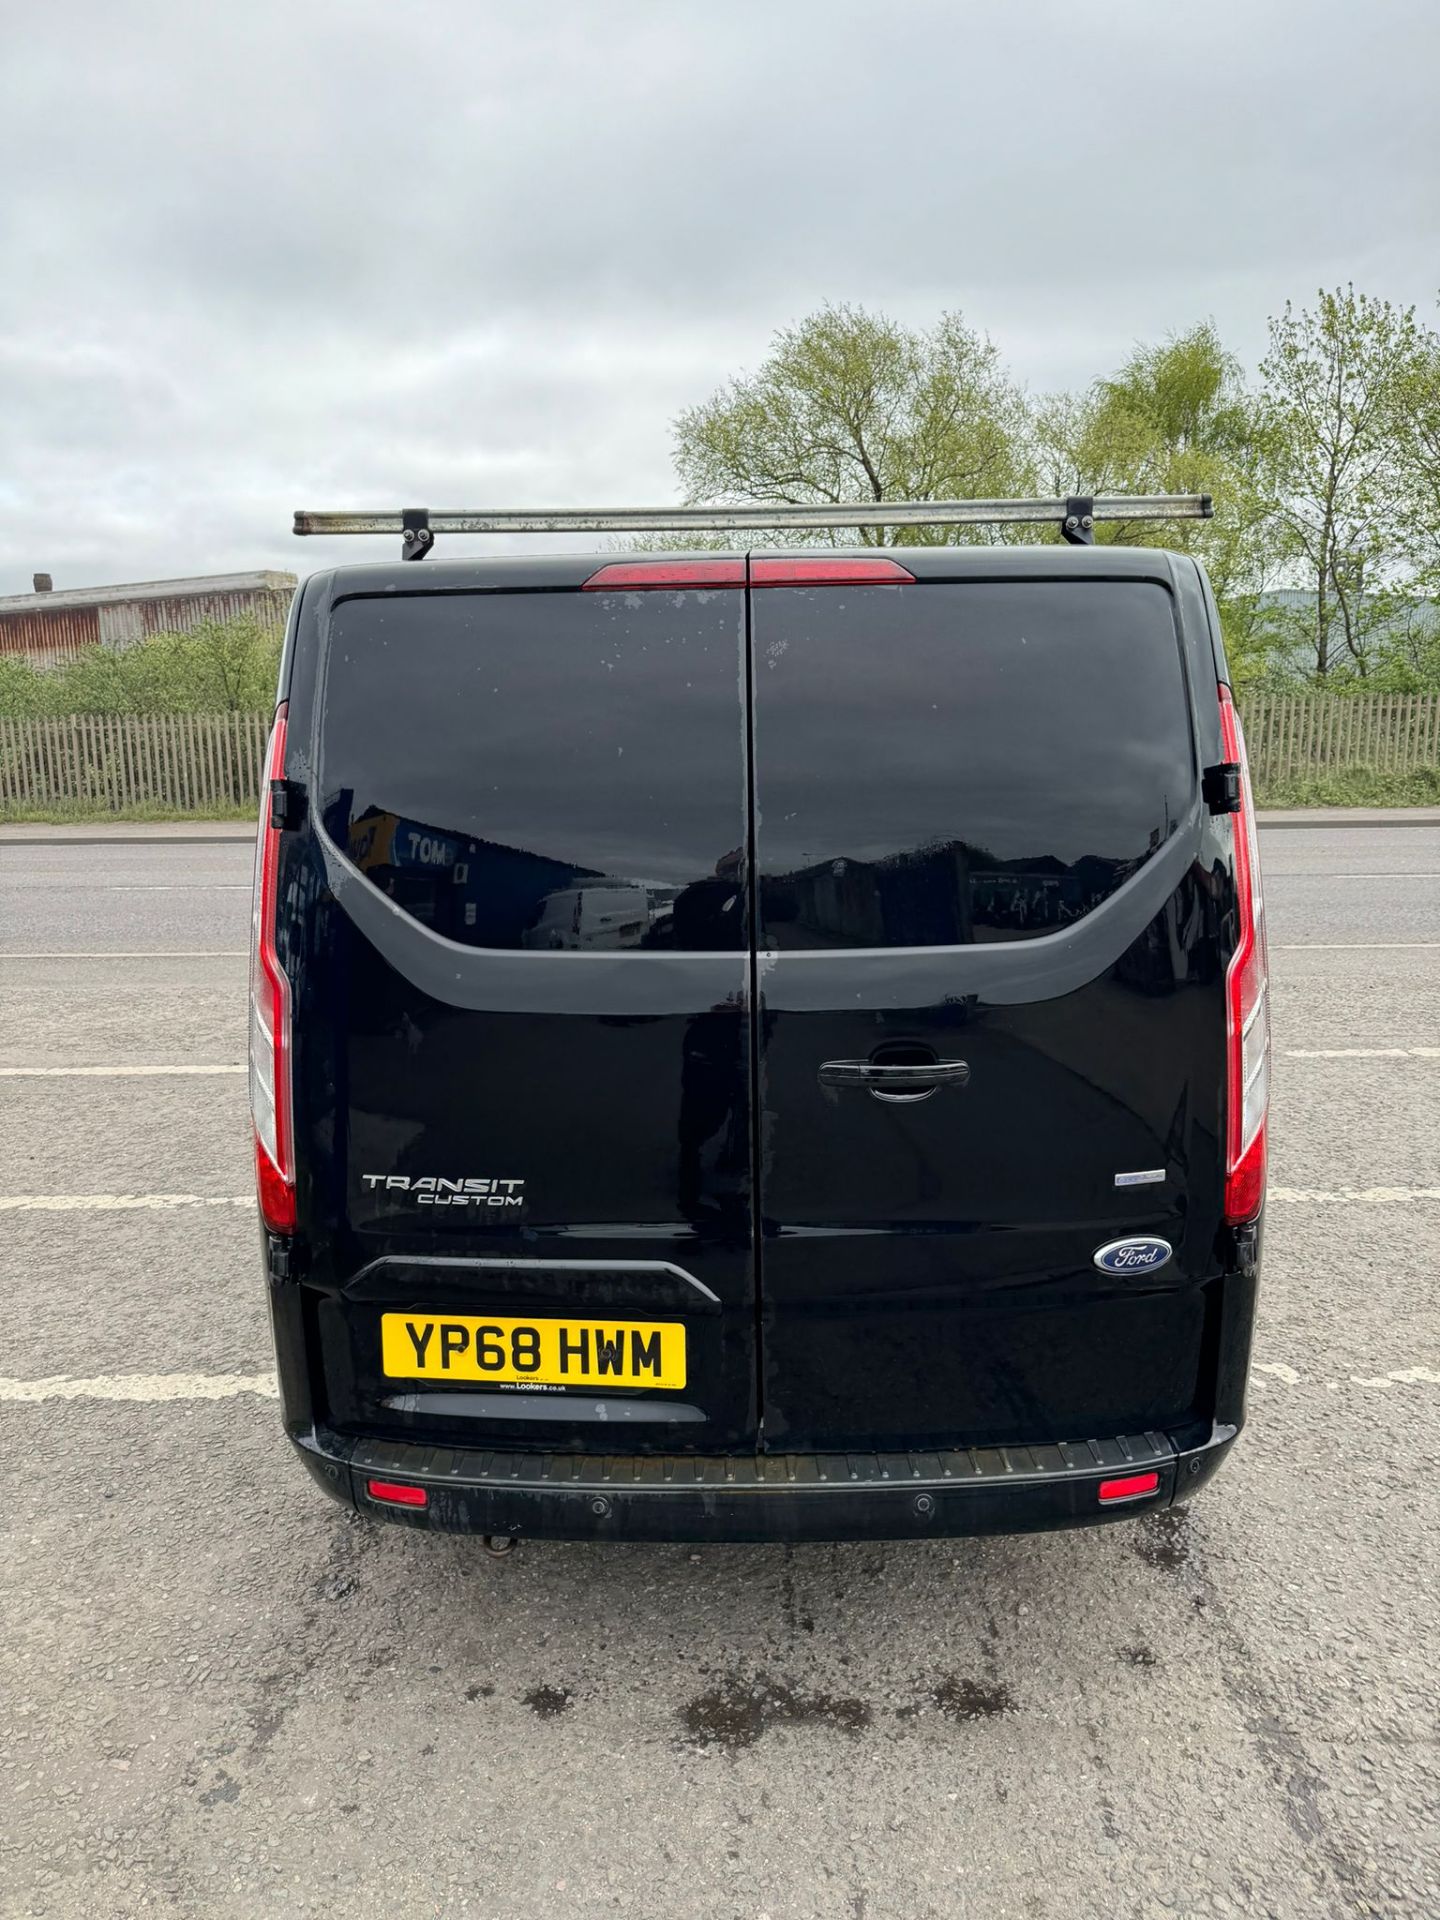 2018 68 FORD TRANSIT CUSTOM LIMITED PANEL VAN - 114K MILES - EURO 6 - AIR CON -  ALLOY WHEELS  - Image 2 of 12